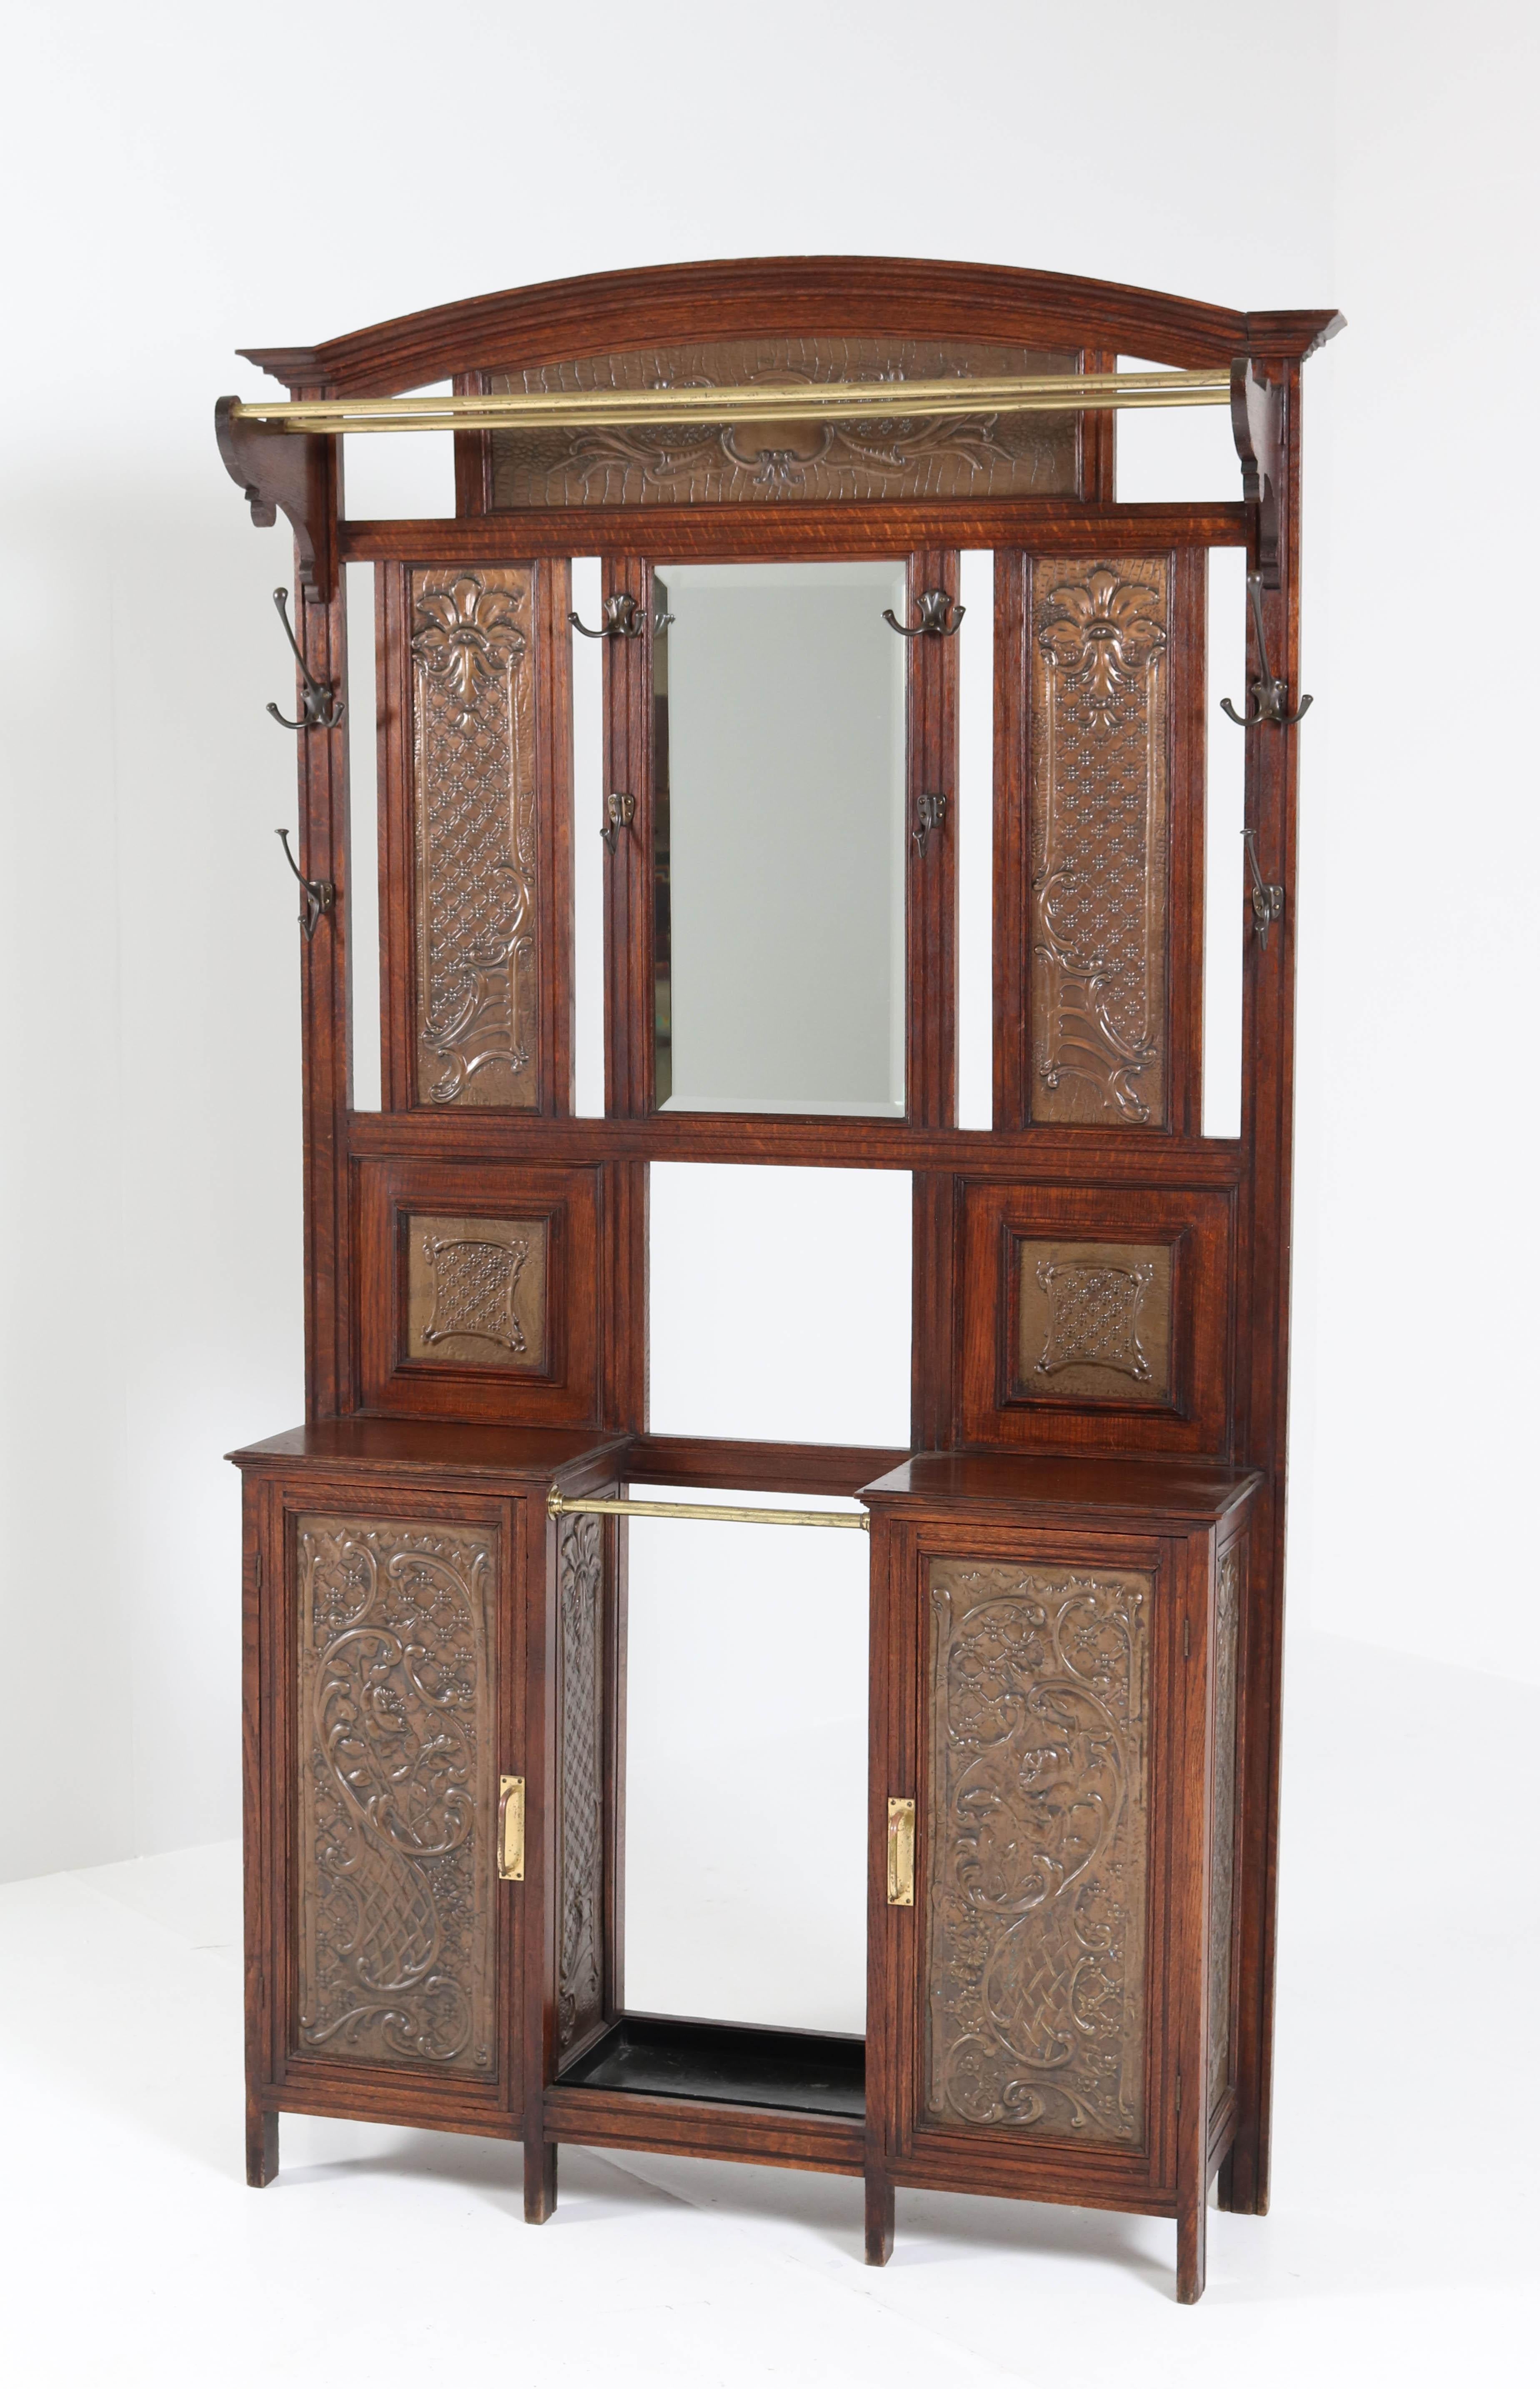 Early 20th Century French Oak Art Nouveau Porte Manteau or Coat Rack with Brass Panels, 1900s